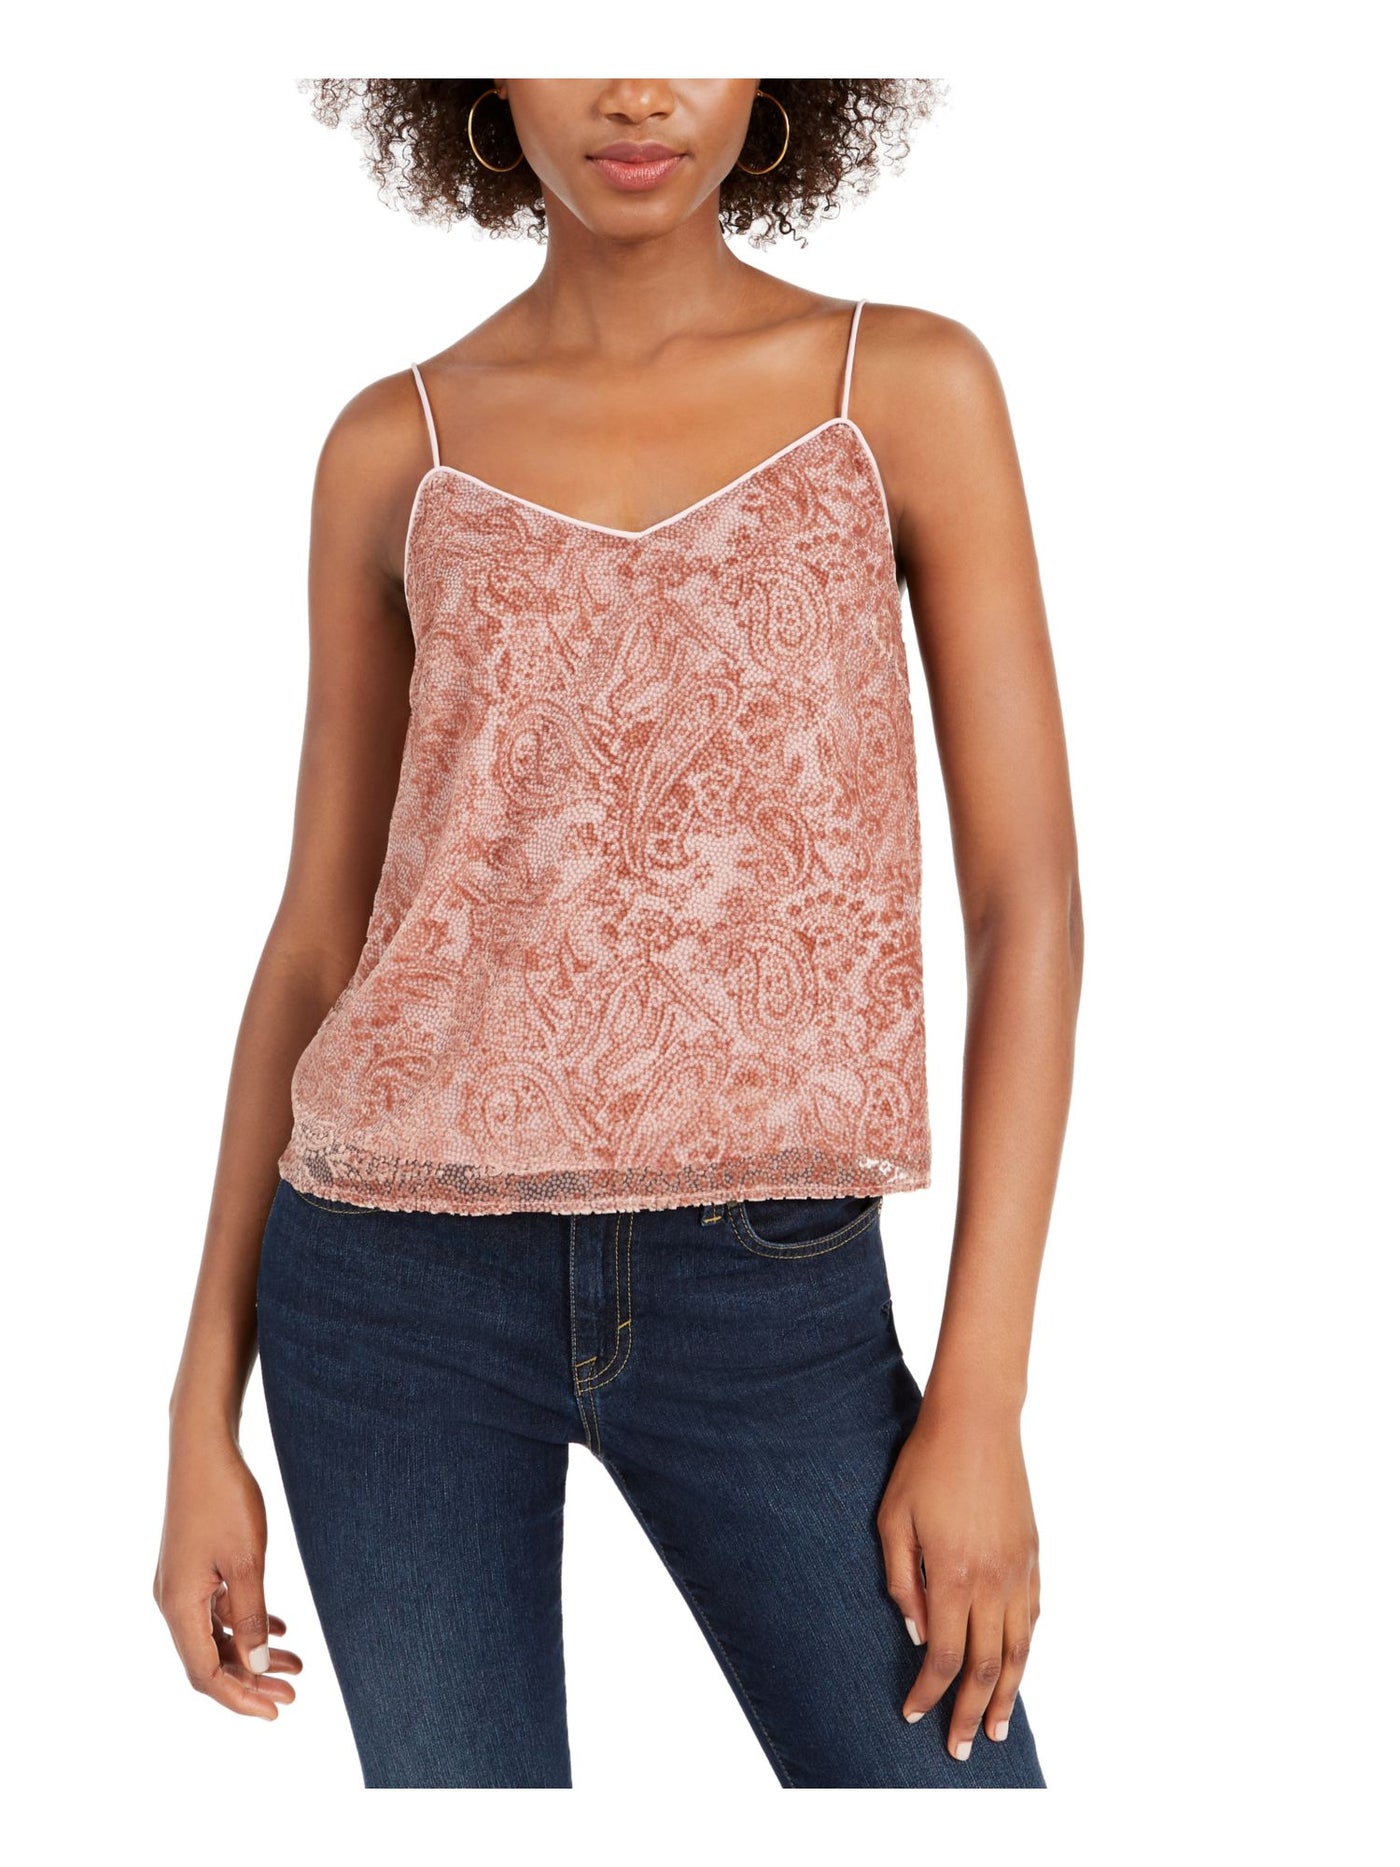 LEYDEN Womens Pink Embroidered Spaghetti Strap V Neck Tank Top Juniors S